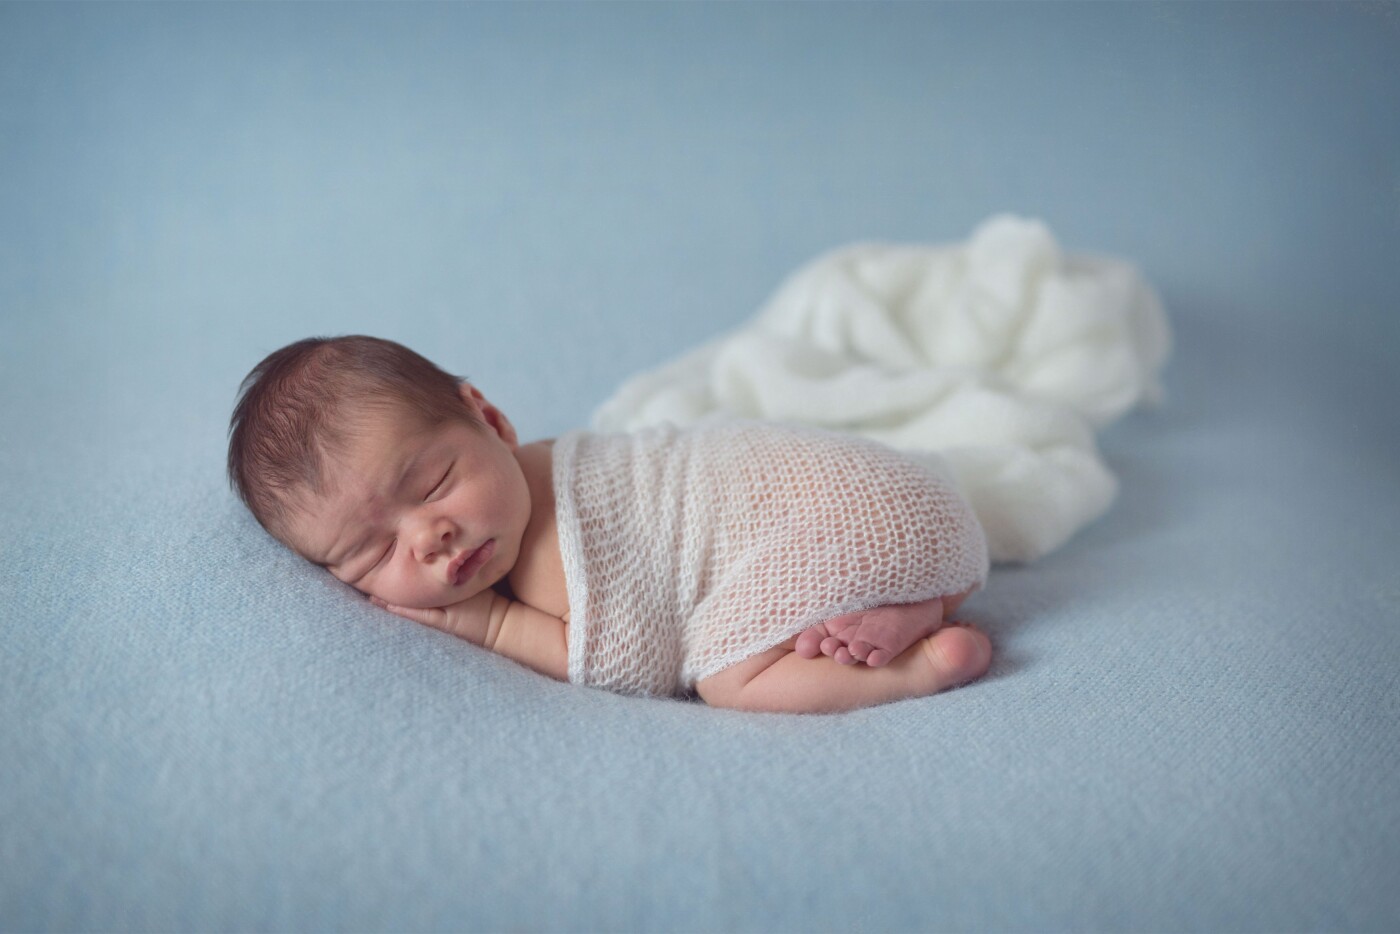 This little guy has the cutest cleft in his chin, that I didn't notice till I was editing. I love newborn sessions and all the excitement and nervousness of new parents. I love to snuggle these cuties and give their parents memories for a lifetime.